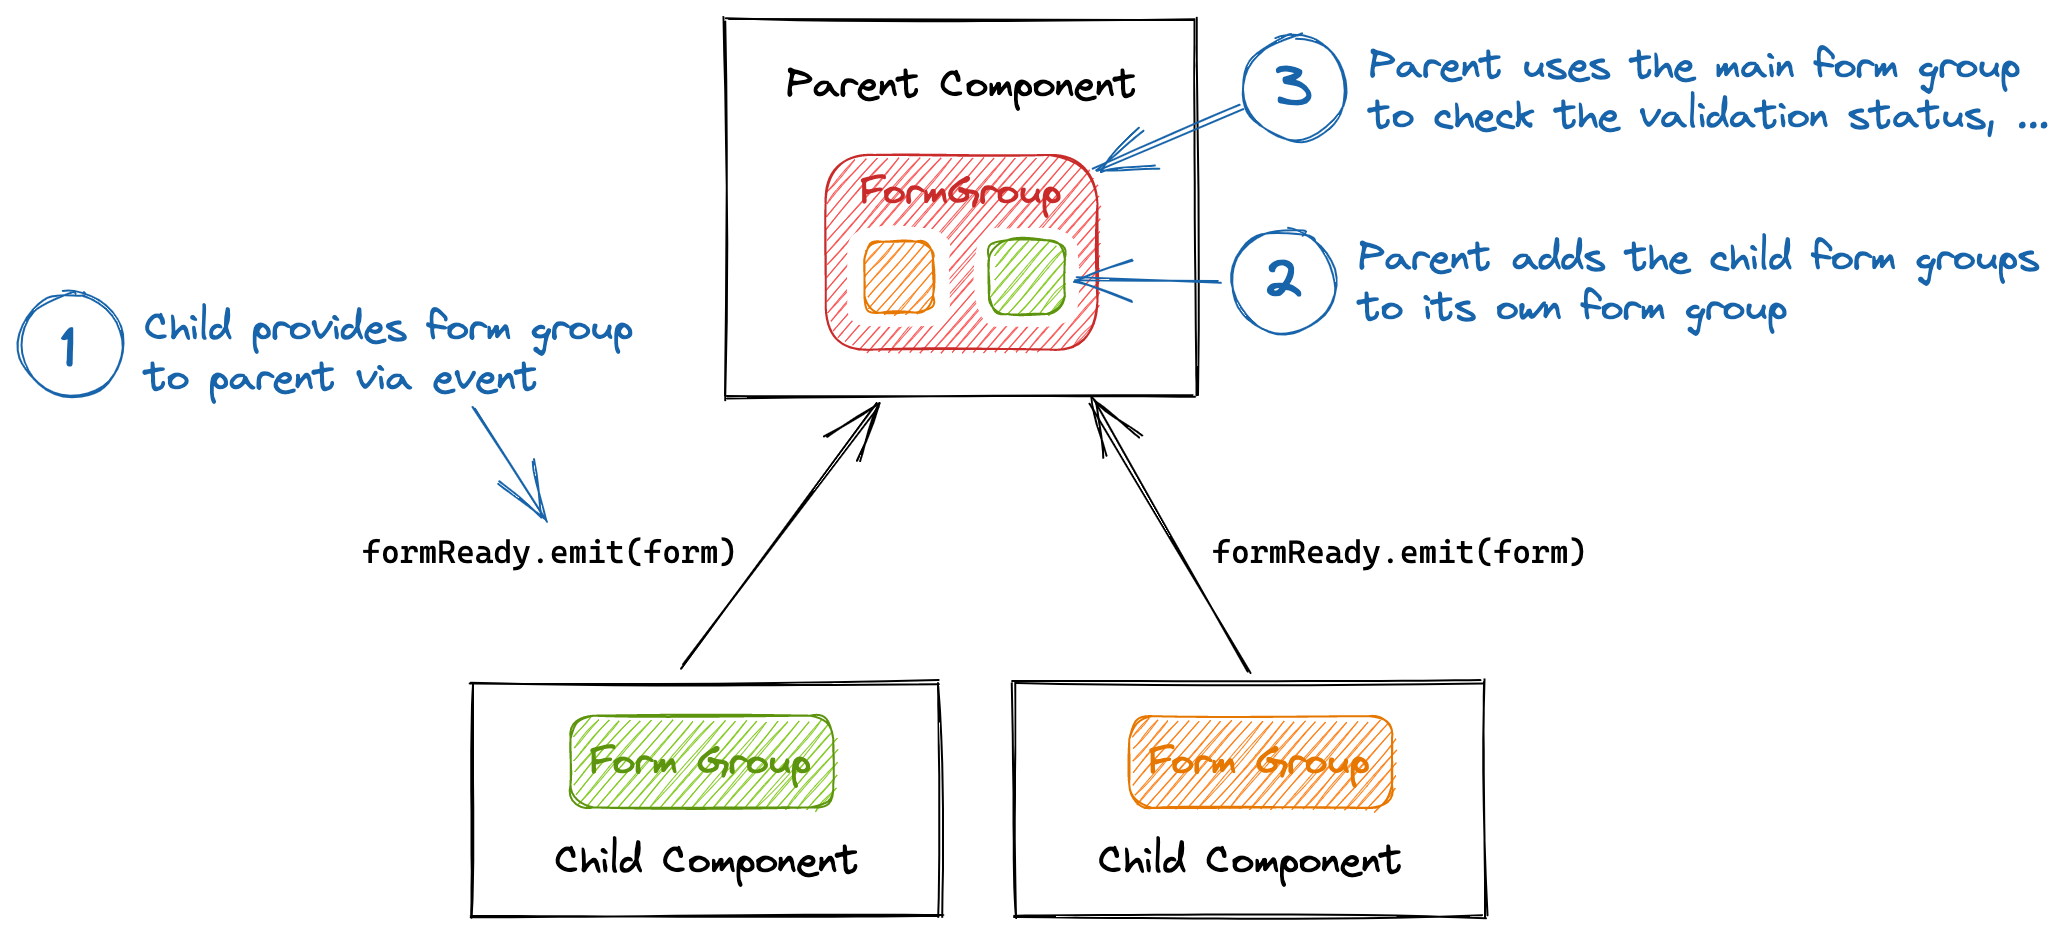 Component architecture where the child components provide their form group via event to the parent component.